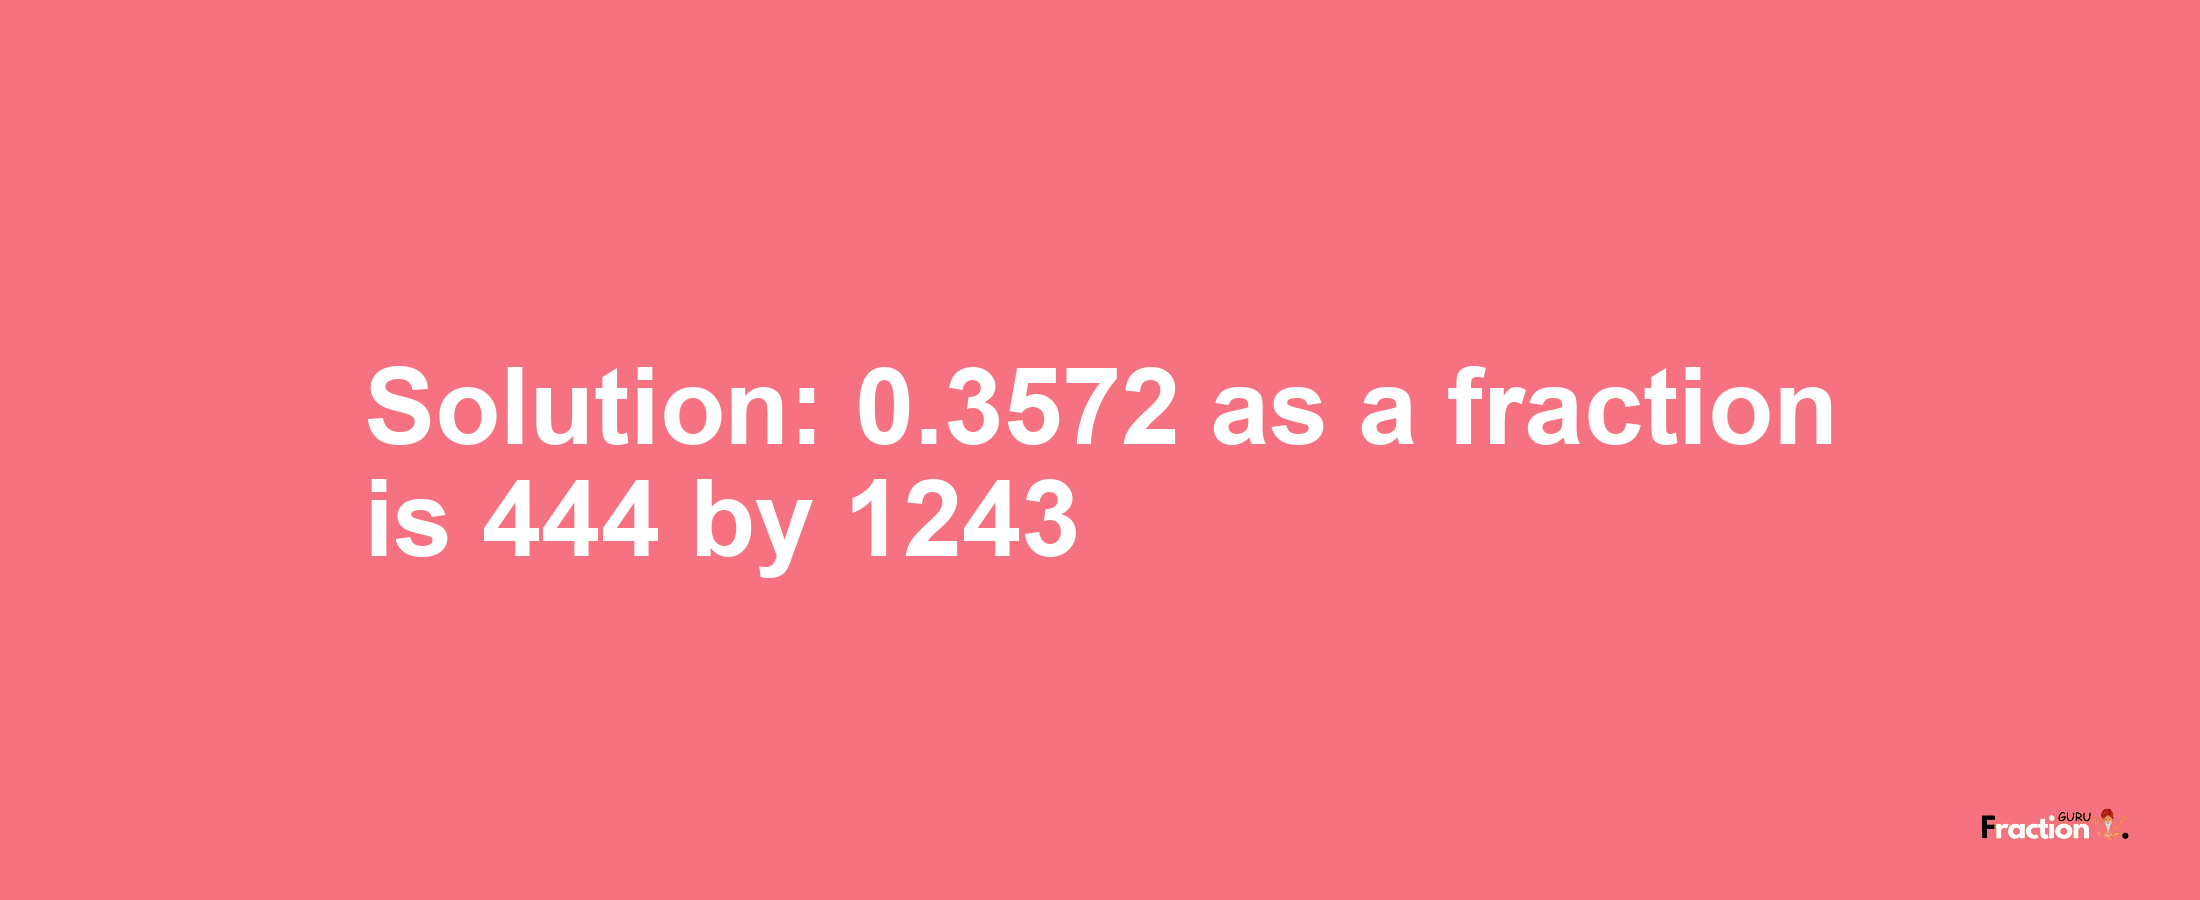 Solution:0.3572 as a fraction is 444/1243